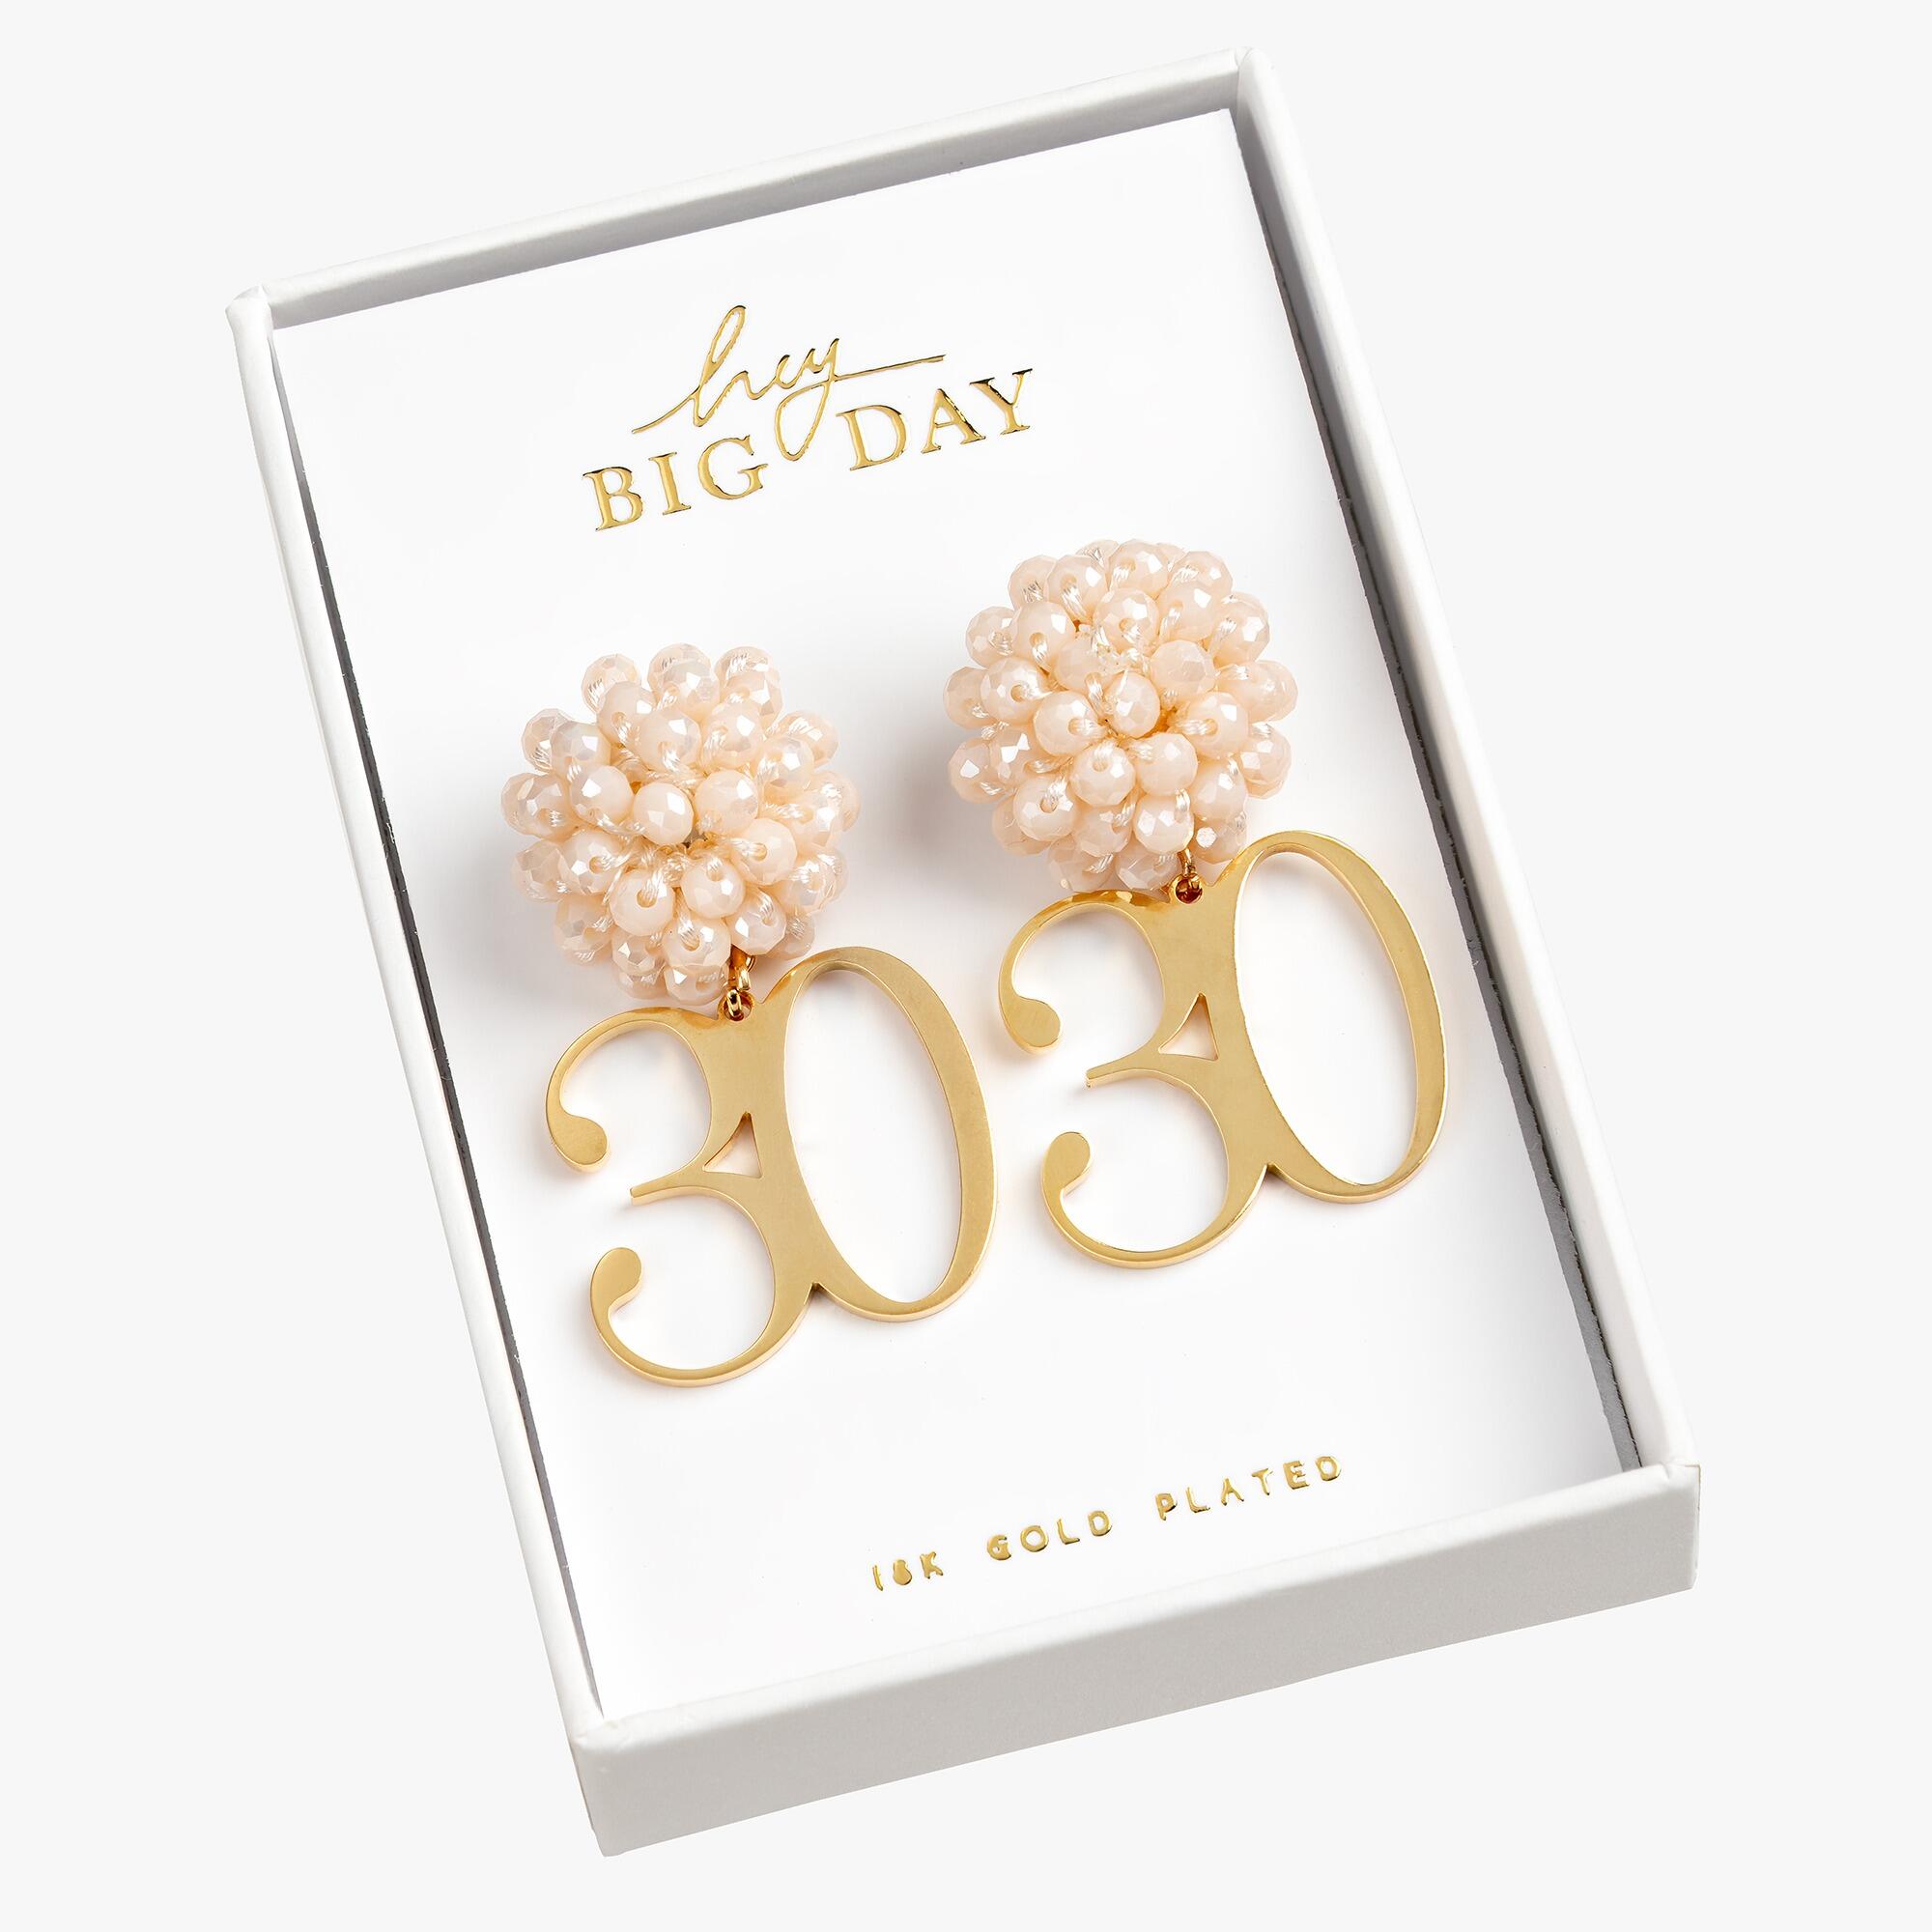 Gold Plated "Age" earrings